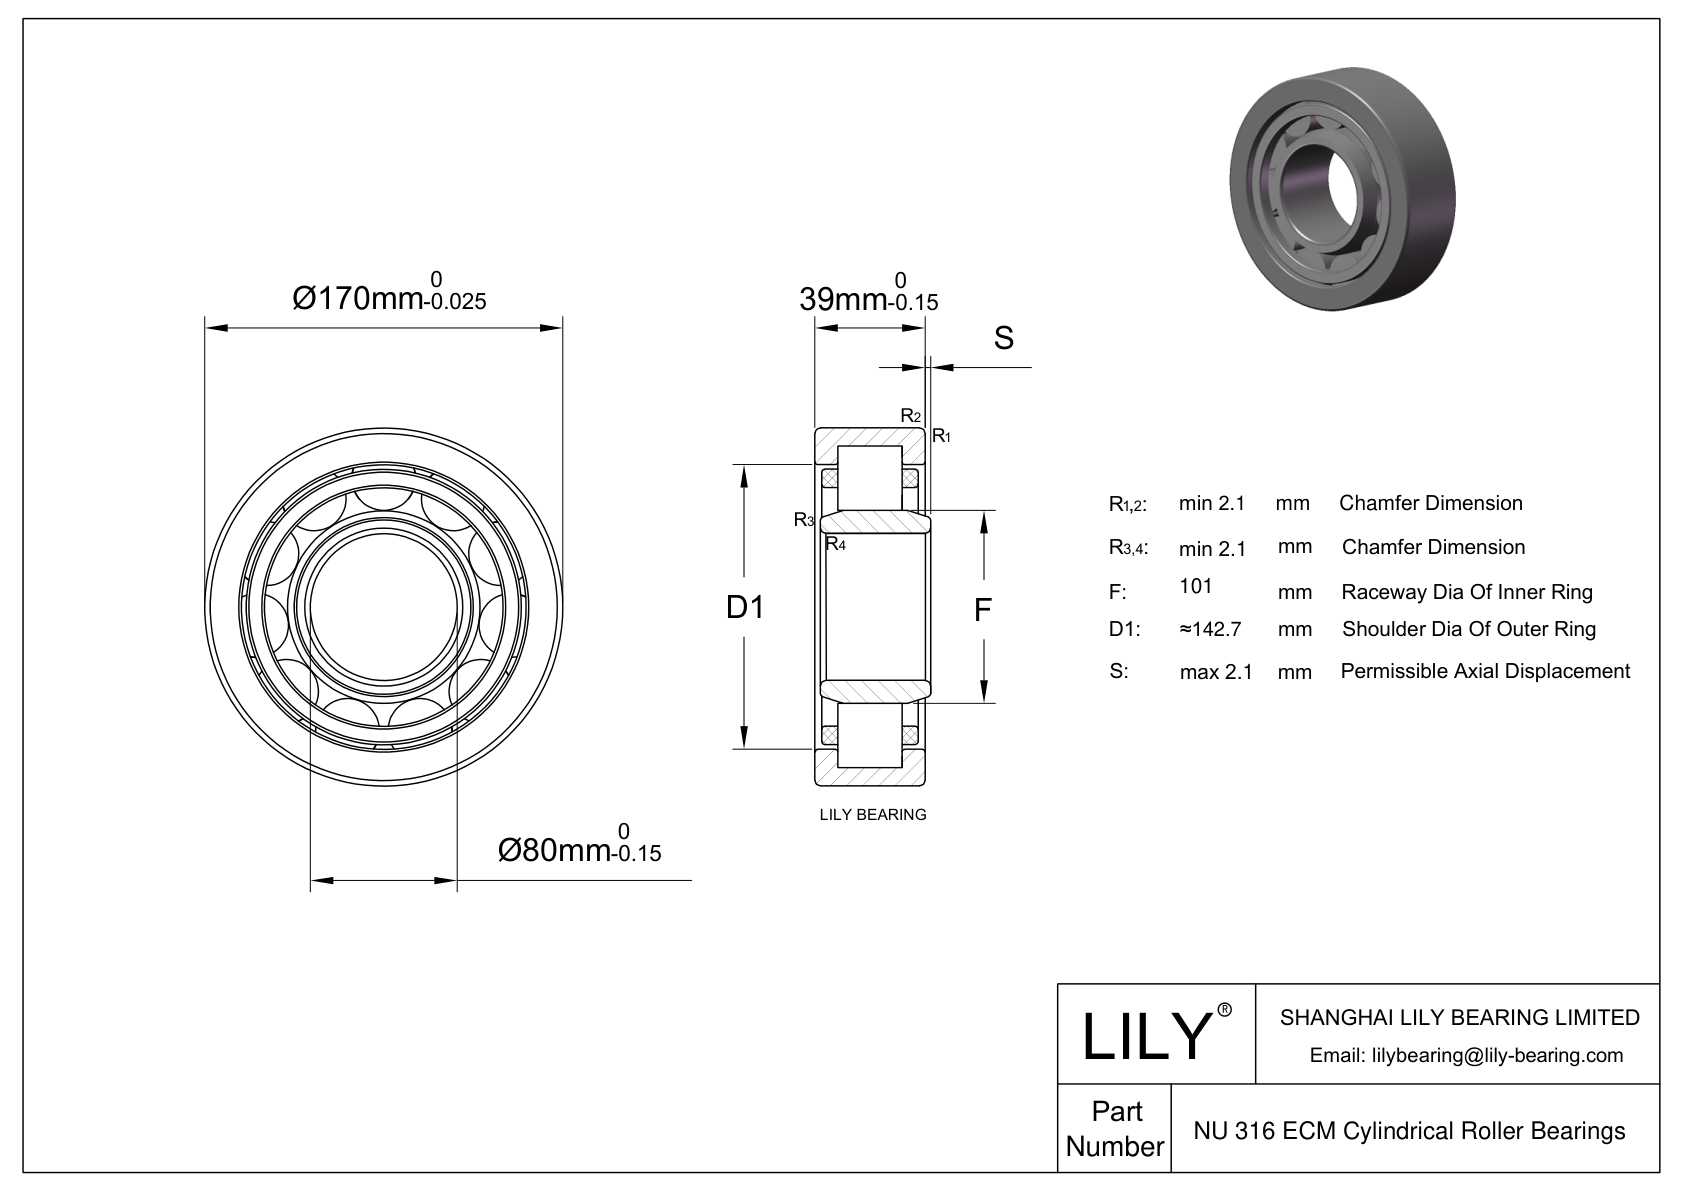 NU 316 ECM/C3VL0241 Ceramic Coated Cylindrical Roller Bearings cad drawing